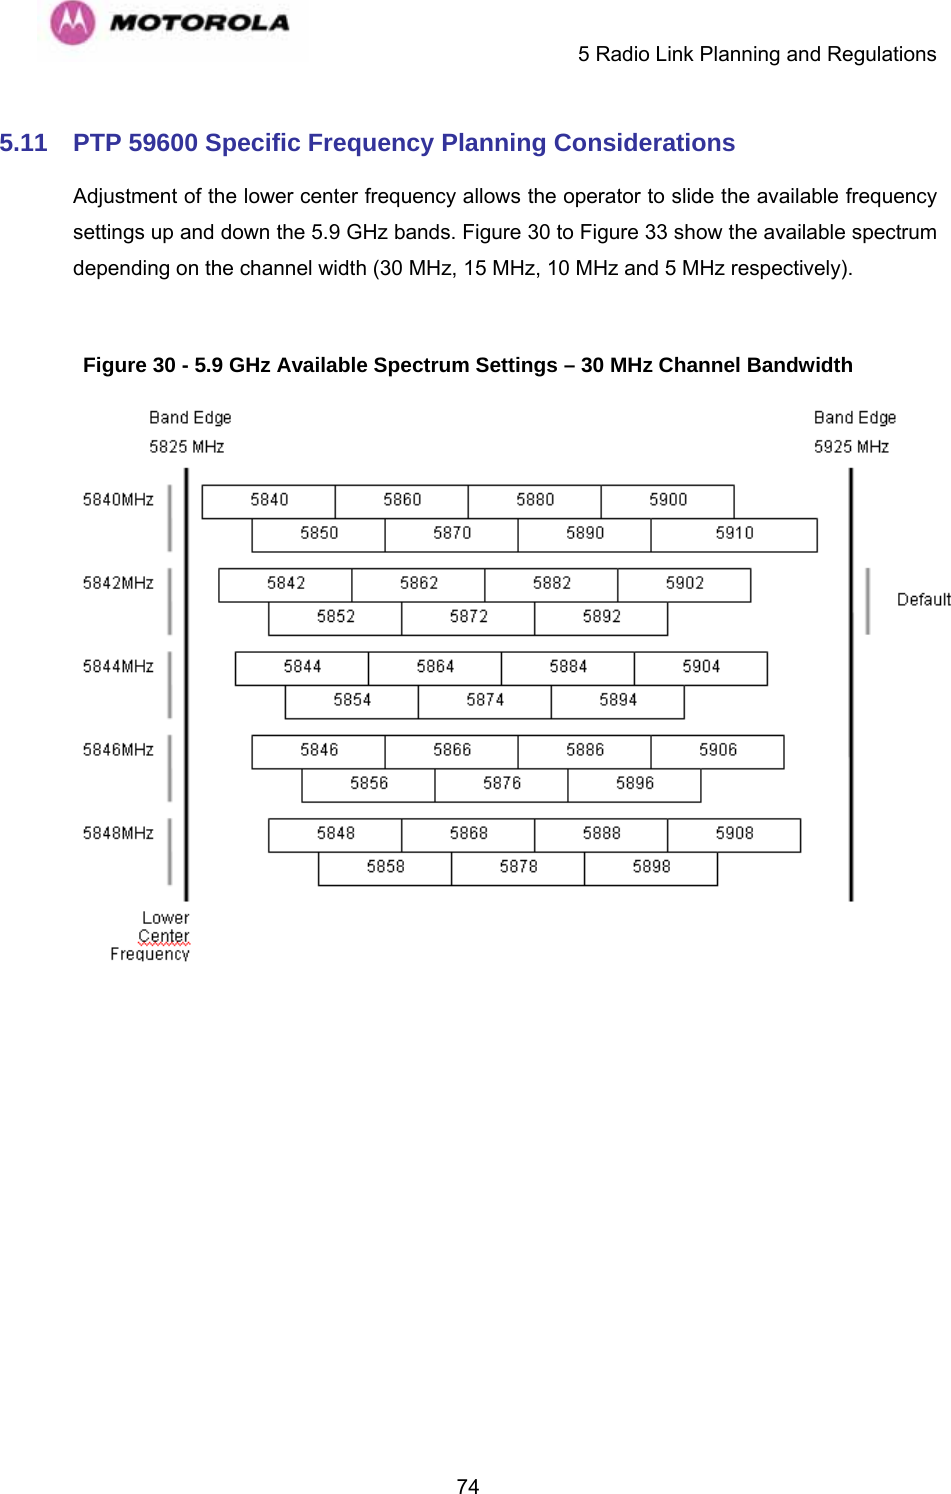     5 Radio Link Planning and Regulations  745.11  PTP 59600 Specific Frequency Planning Considerations Adjustment of the lower center frequency allows the operator to slide the available frequency settings up and down the 5.9 GHz bands. Figure 30 to Figure 33 show the available spectrum depending on the channel width (30 MHz, 15 MHz, 10 MHz and 5 MHz respectively).  Figure 30 - 5.9 GHz Available Spectrum Settings – 30 MHz Channel Bandwidth  